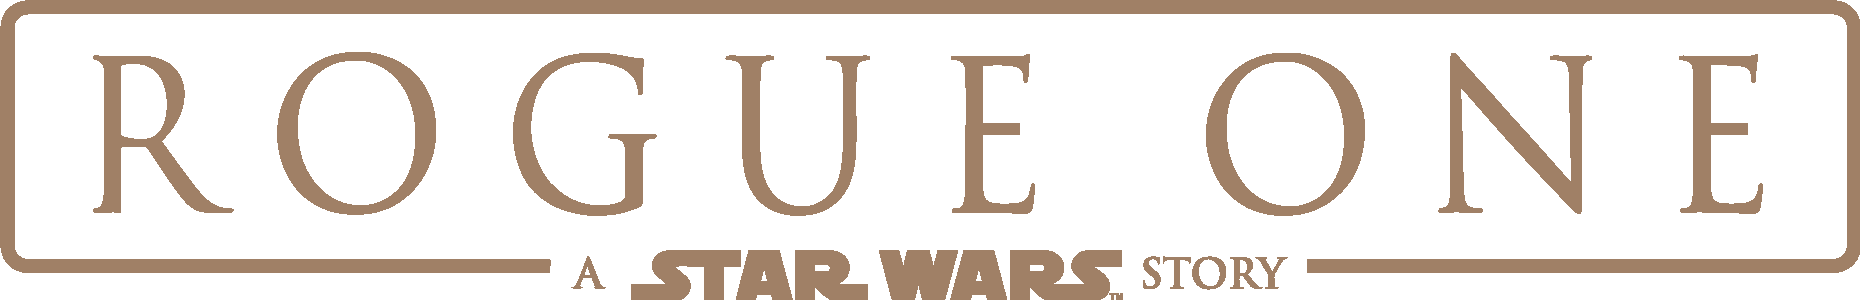 Rogue One  A Star Wars Story Logo Vector